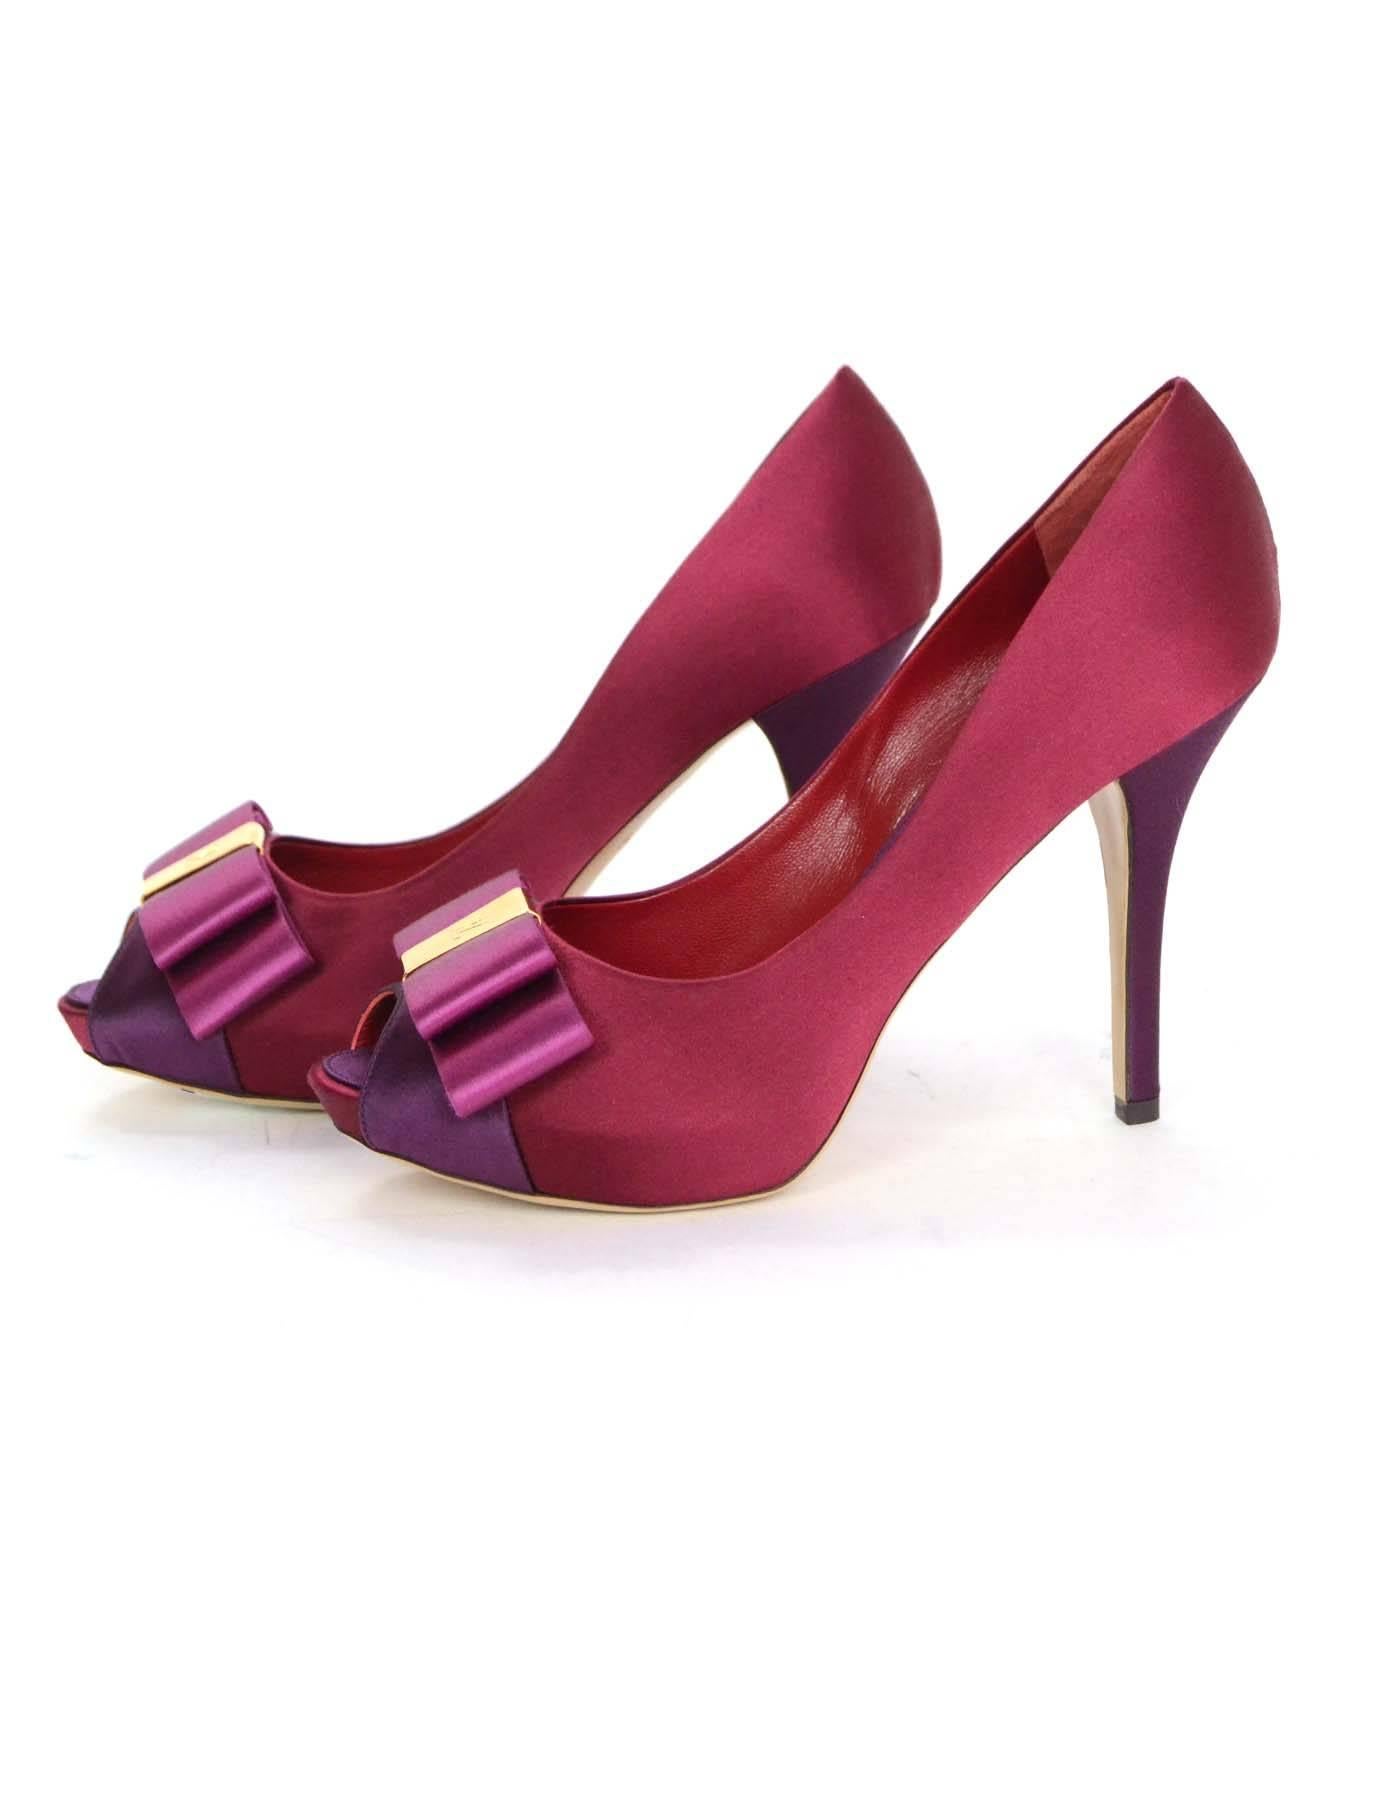 Louis Vuitton Burgundy Satin Peep Toe Pumps Sz 37.5
Features goldtone logo plate and bow at toes

Made In: Italy
Year of Production: 2010
Color: Burgundy
Materials: Satin and metal
Closure/Opening: Slide on
Sole Stamp: Made in Italy 37 1/2